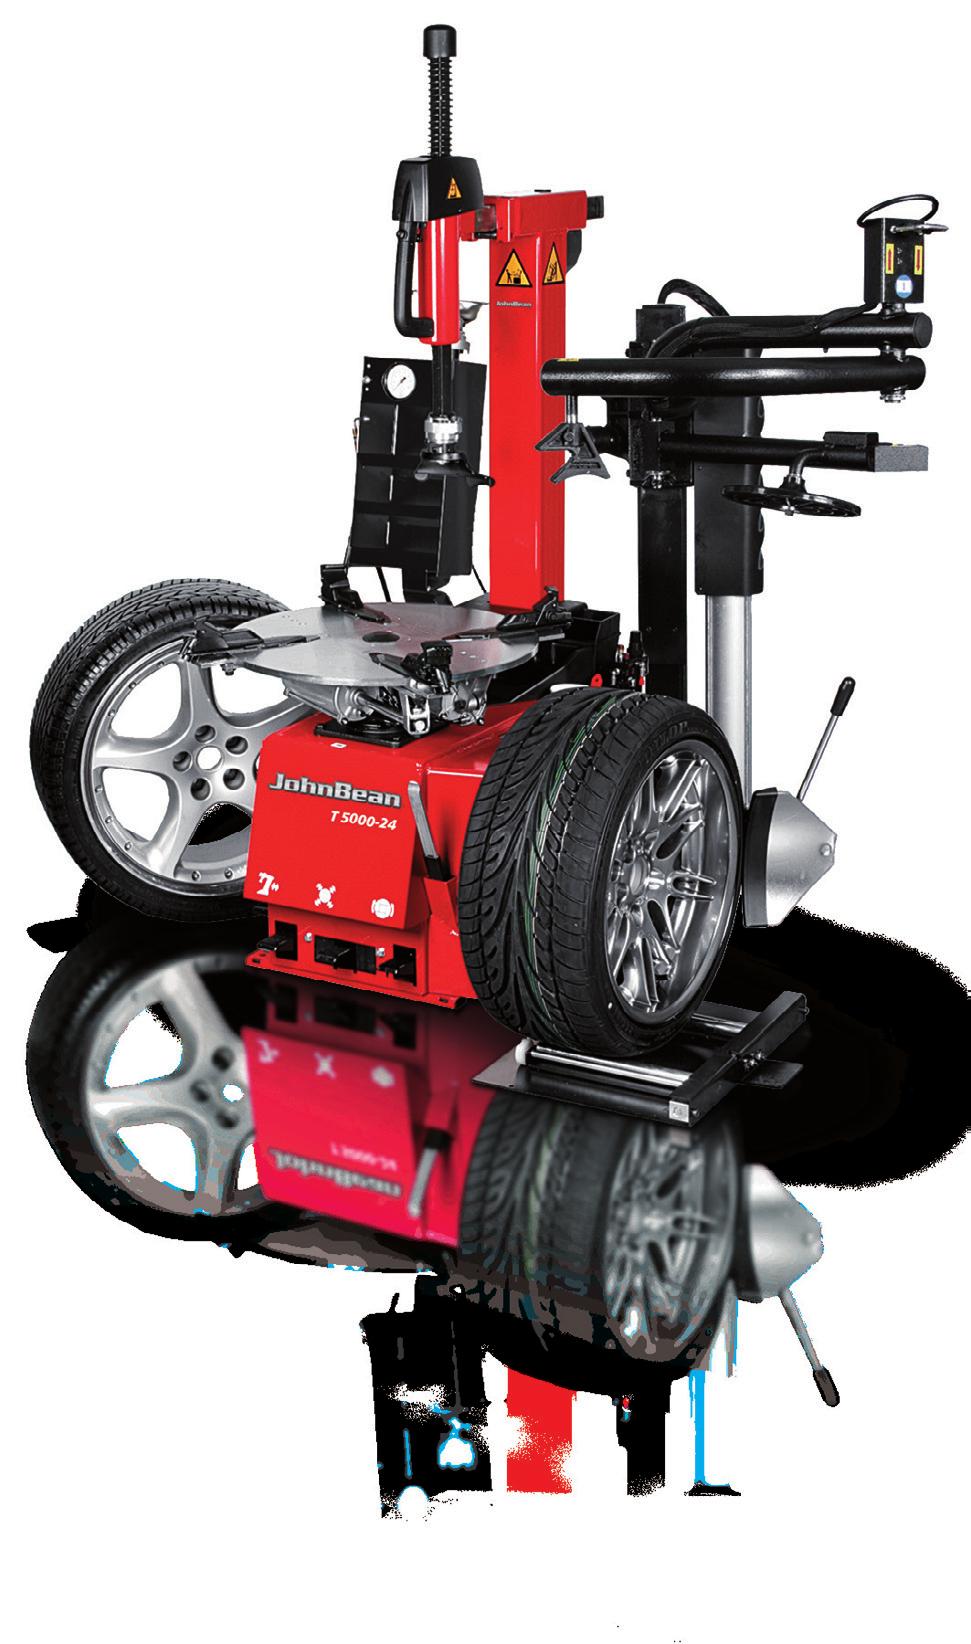 P N E U M A T I C R A N G E T Y R E C H A N G E R S T5000 Pneumatic Tilt Back Post Tyre Changer - EEWH558AE2 The T5000 with the pneumatic mounting tool MH320 PRO, is for gentle and user-friendly